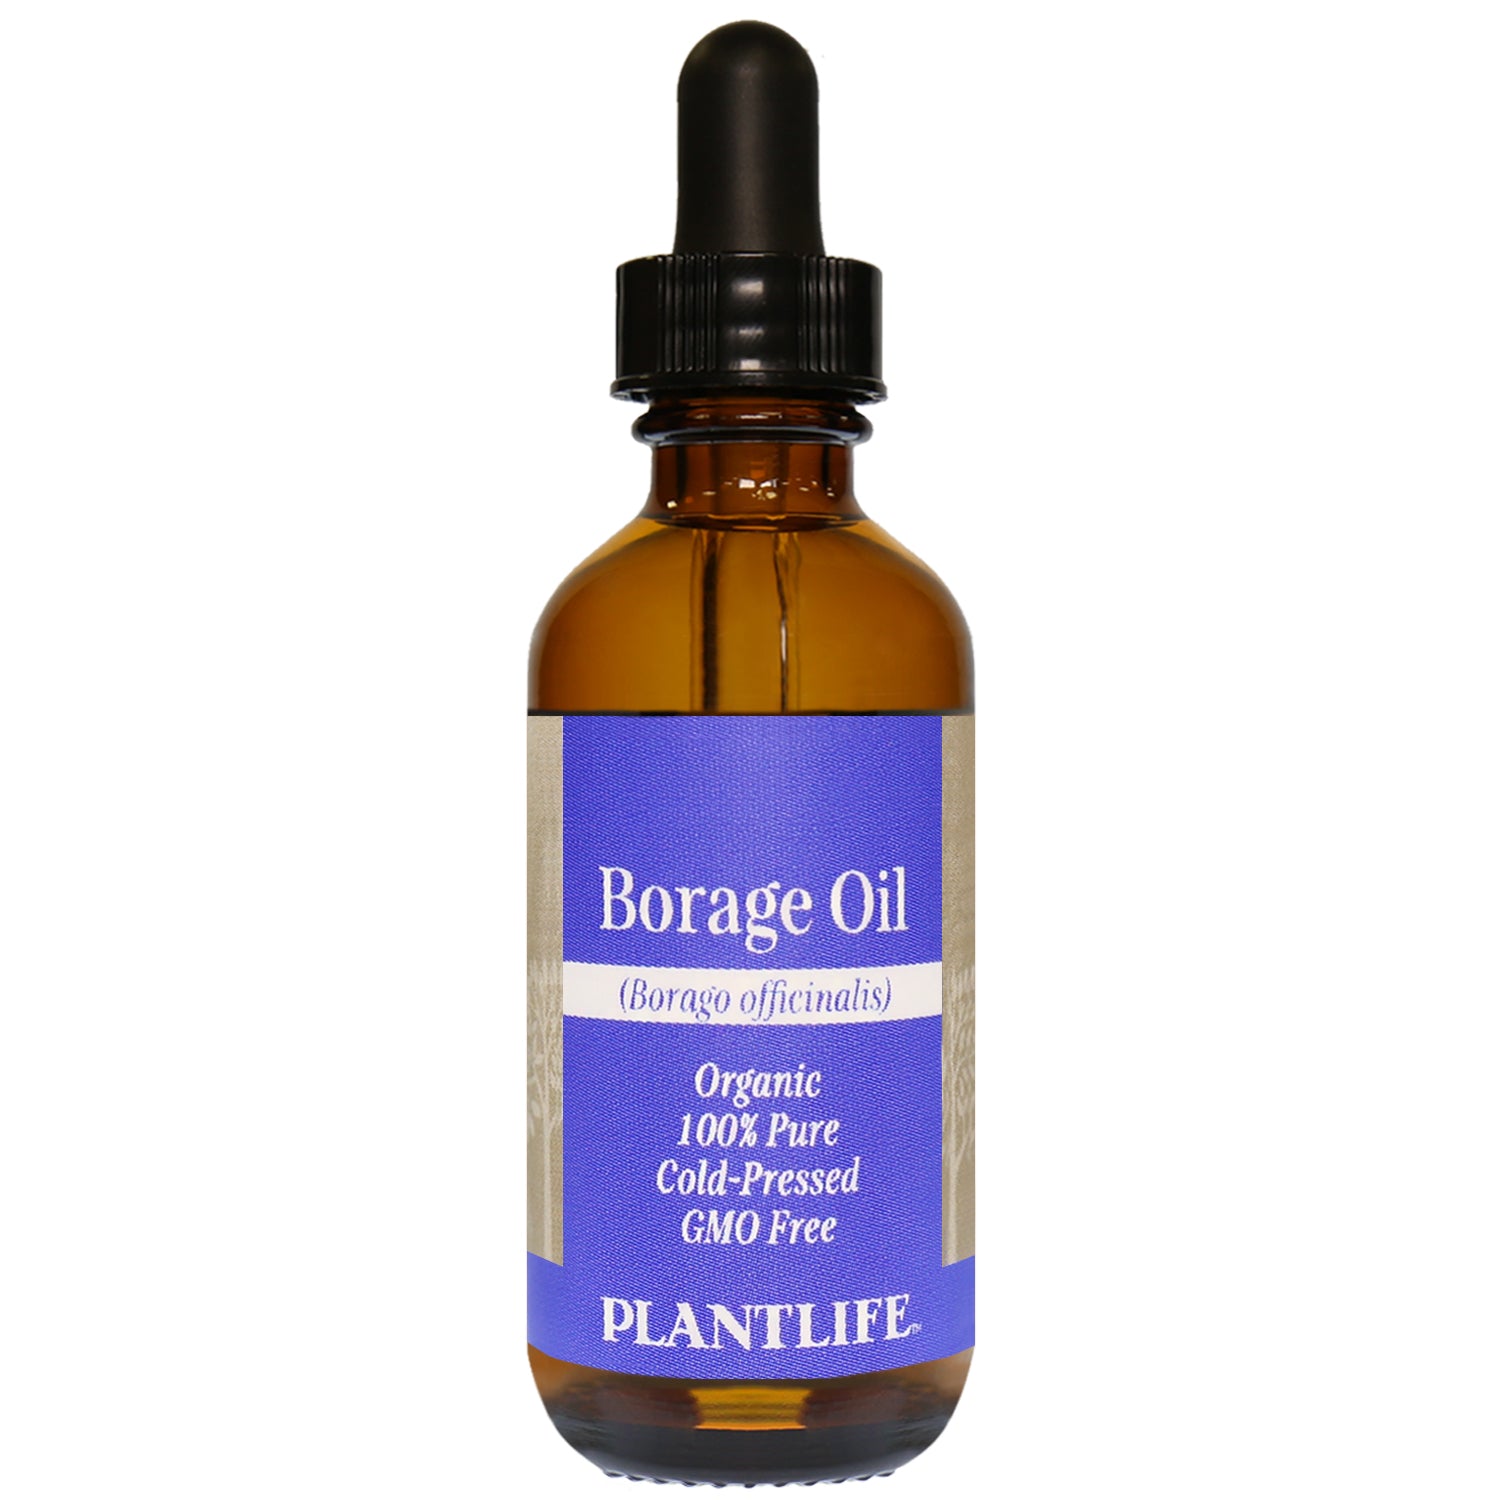 What Is Borage Oil?